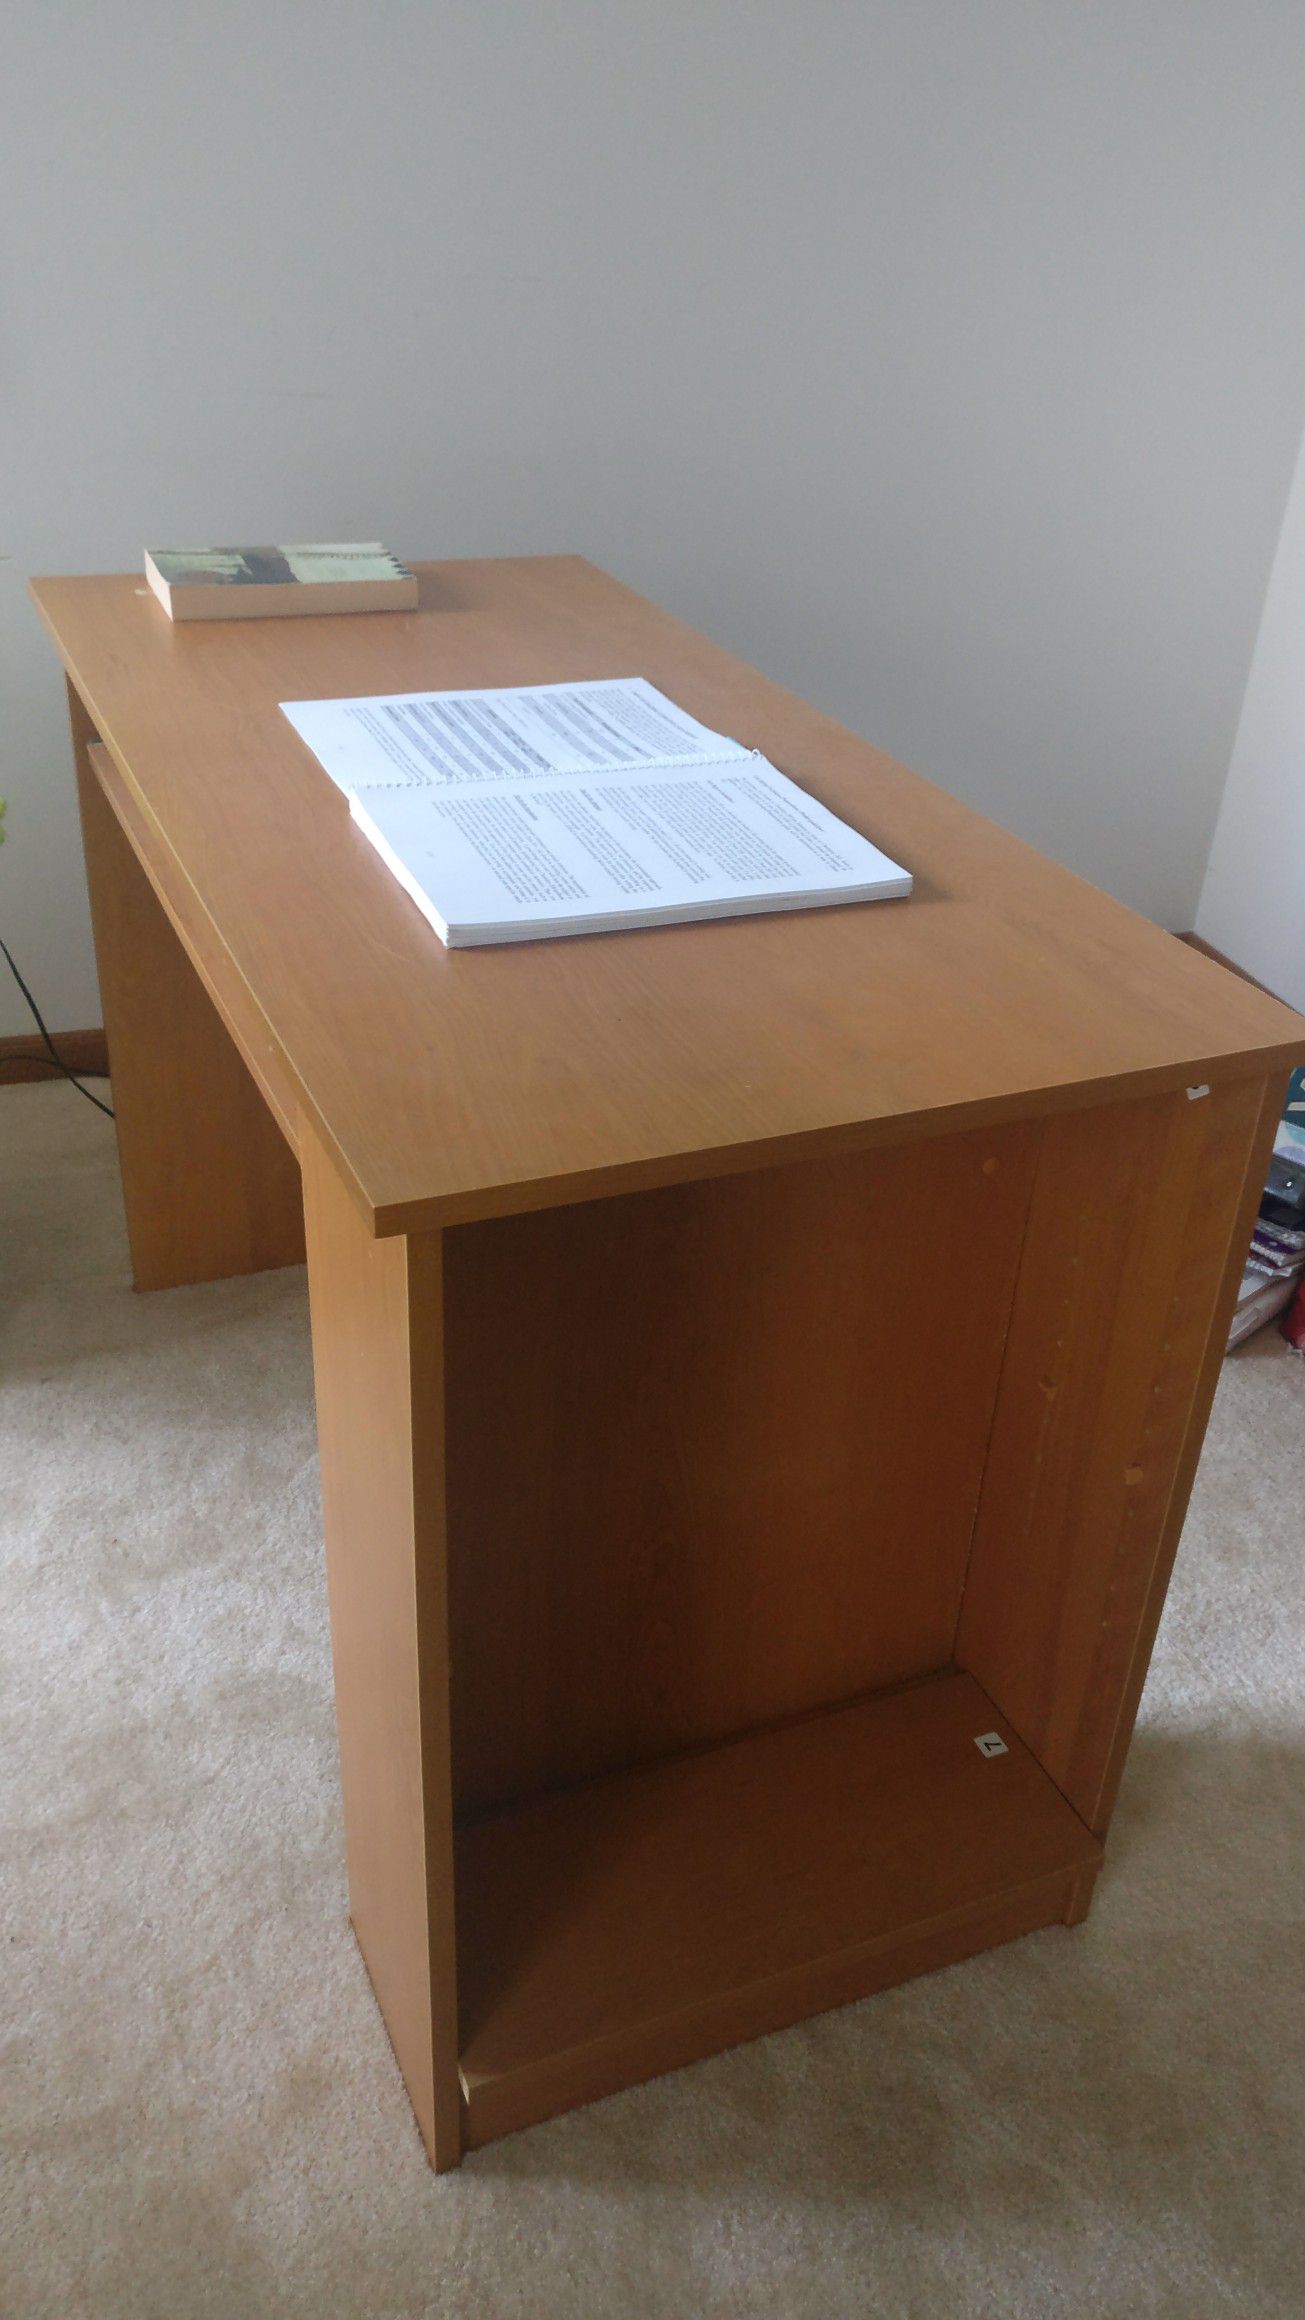 Student desk with book shelf